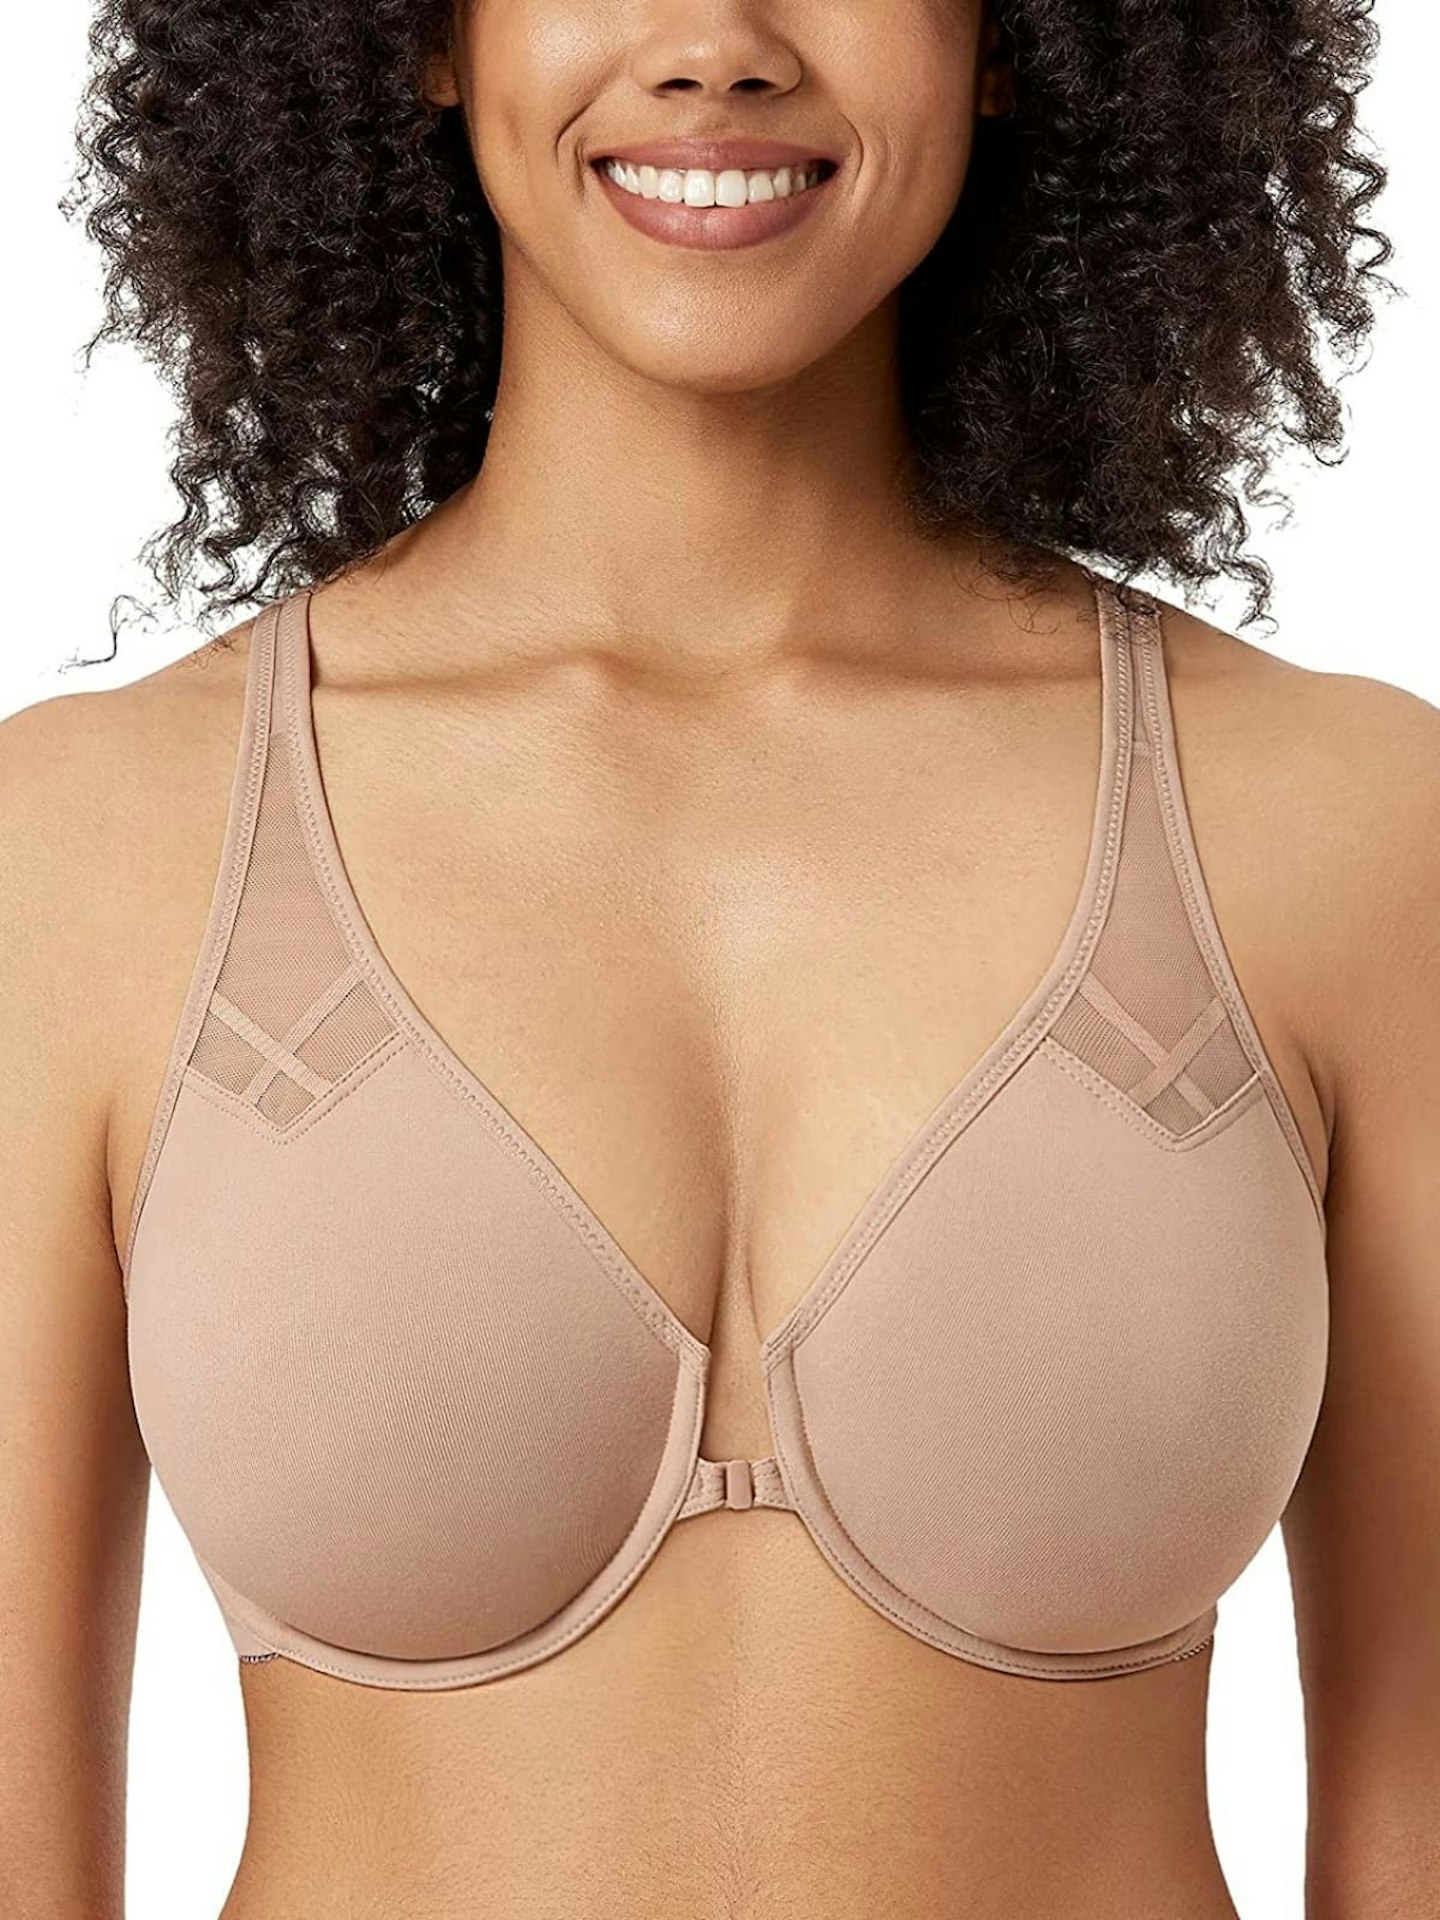 👙BRA HACK 3: 🤩THE BEST STRAPLESS BRA TIP YOU WILL EVER SEE!! 👀🏆👏🏾  👀🎉